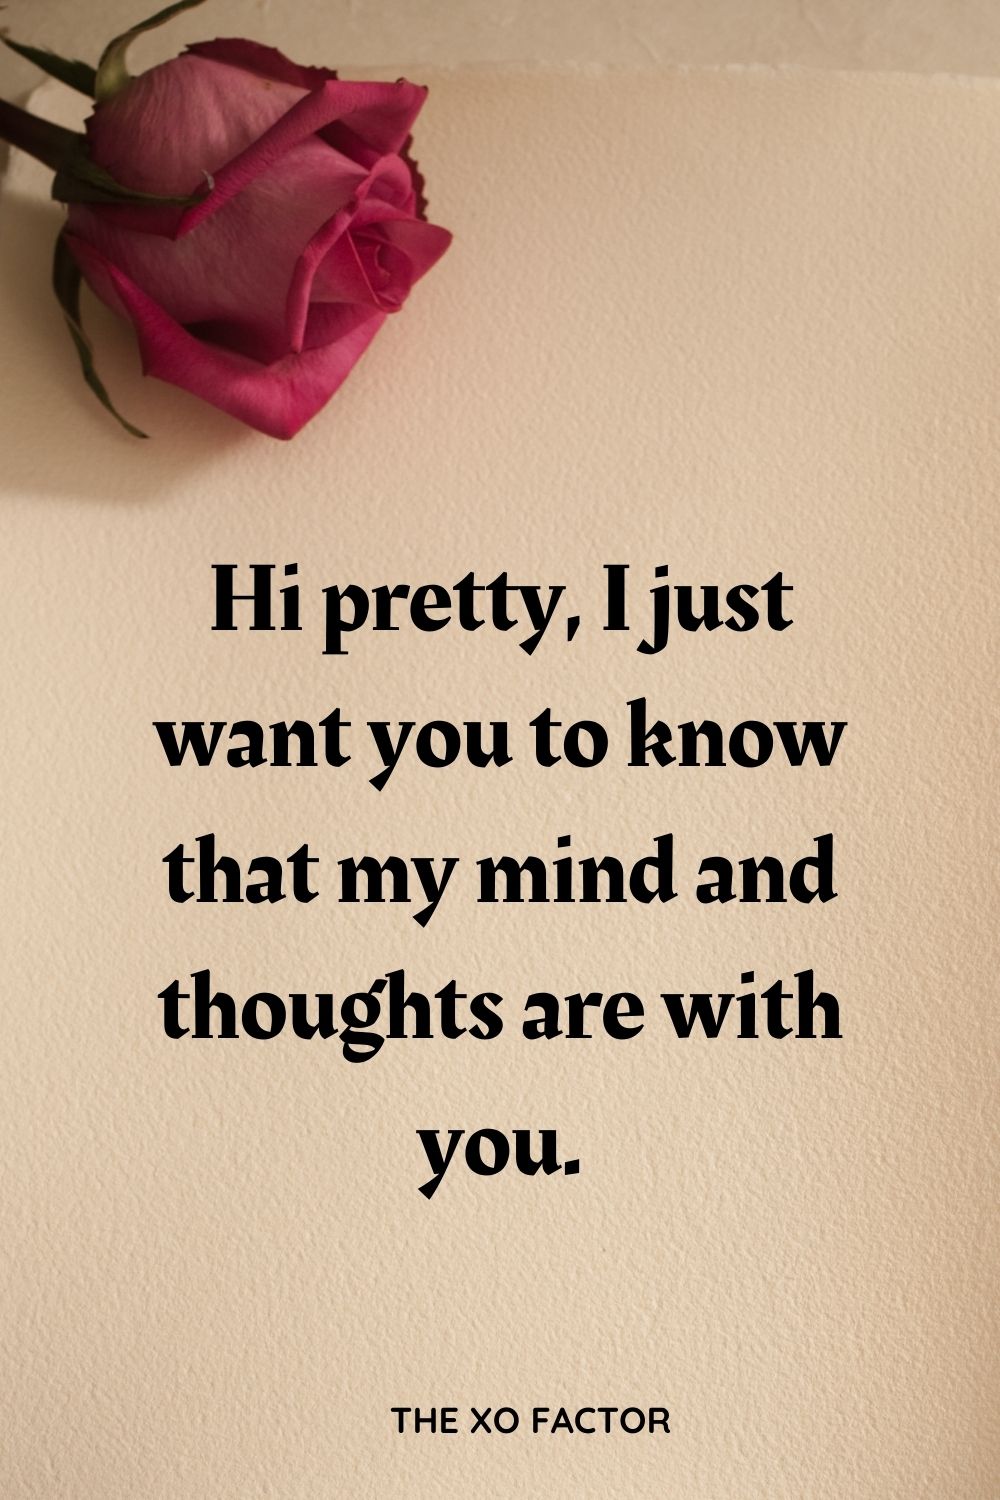 Hi pretty, I just want you to know that my mind and thoughts are with you.